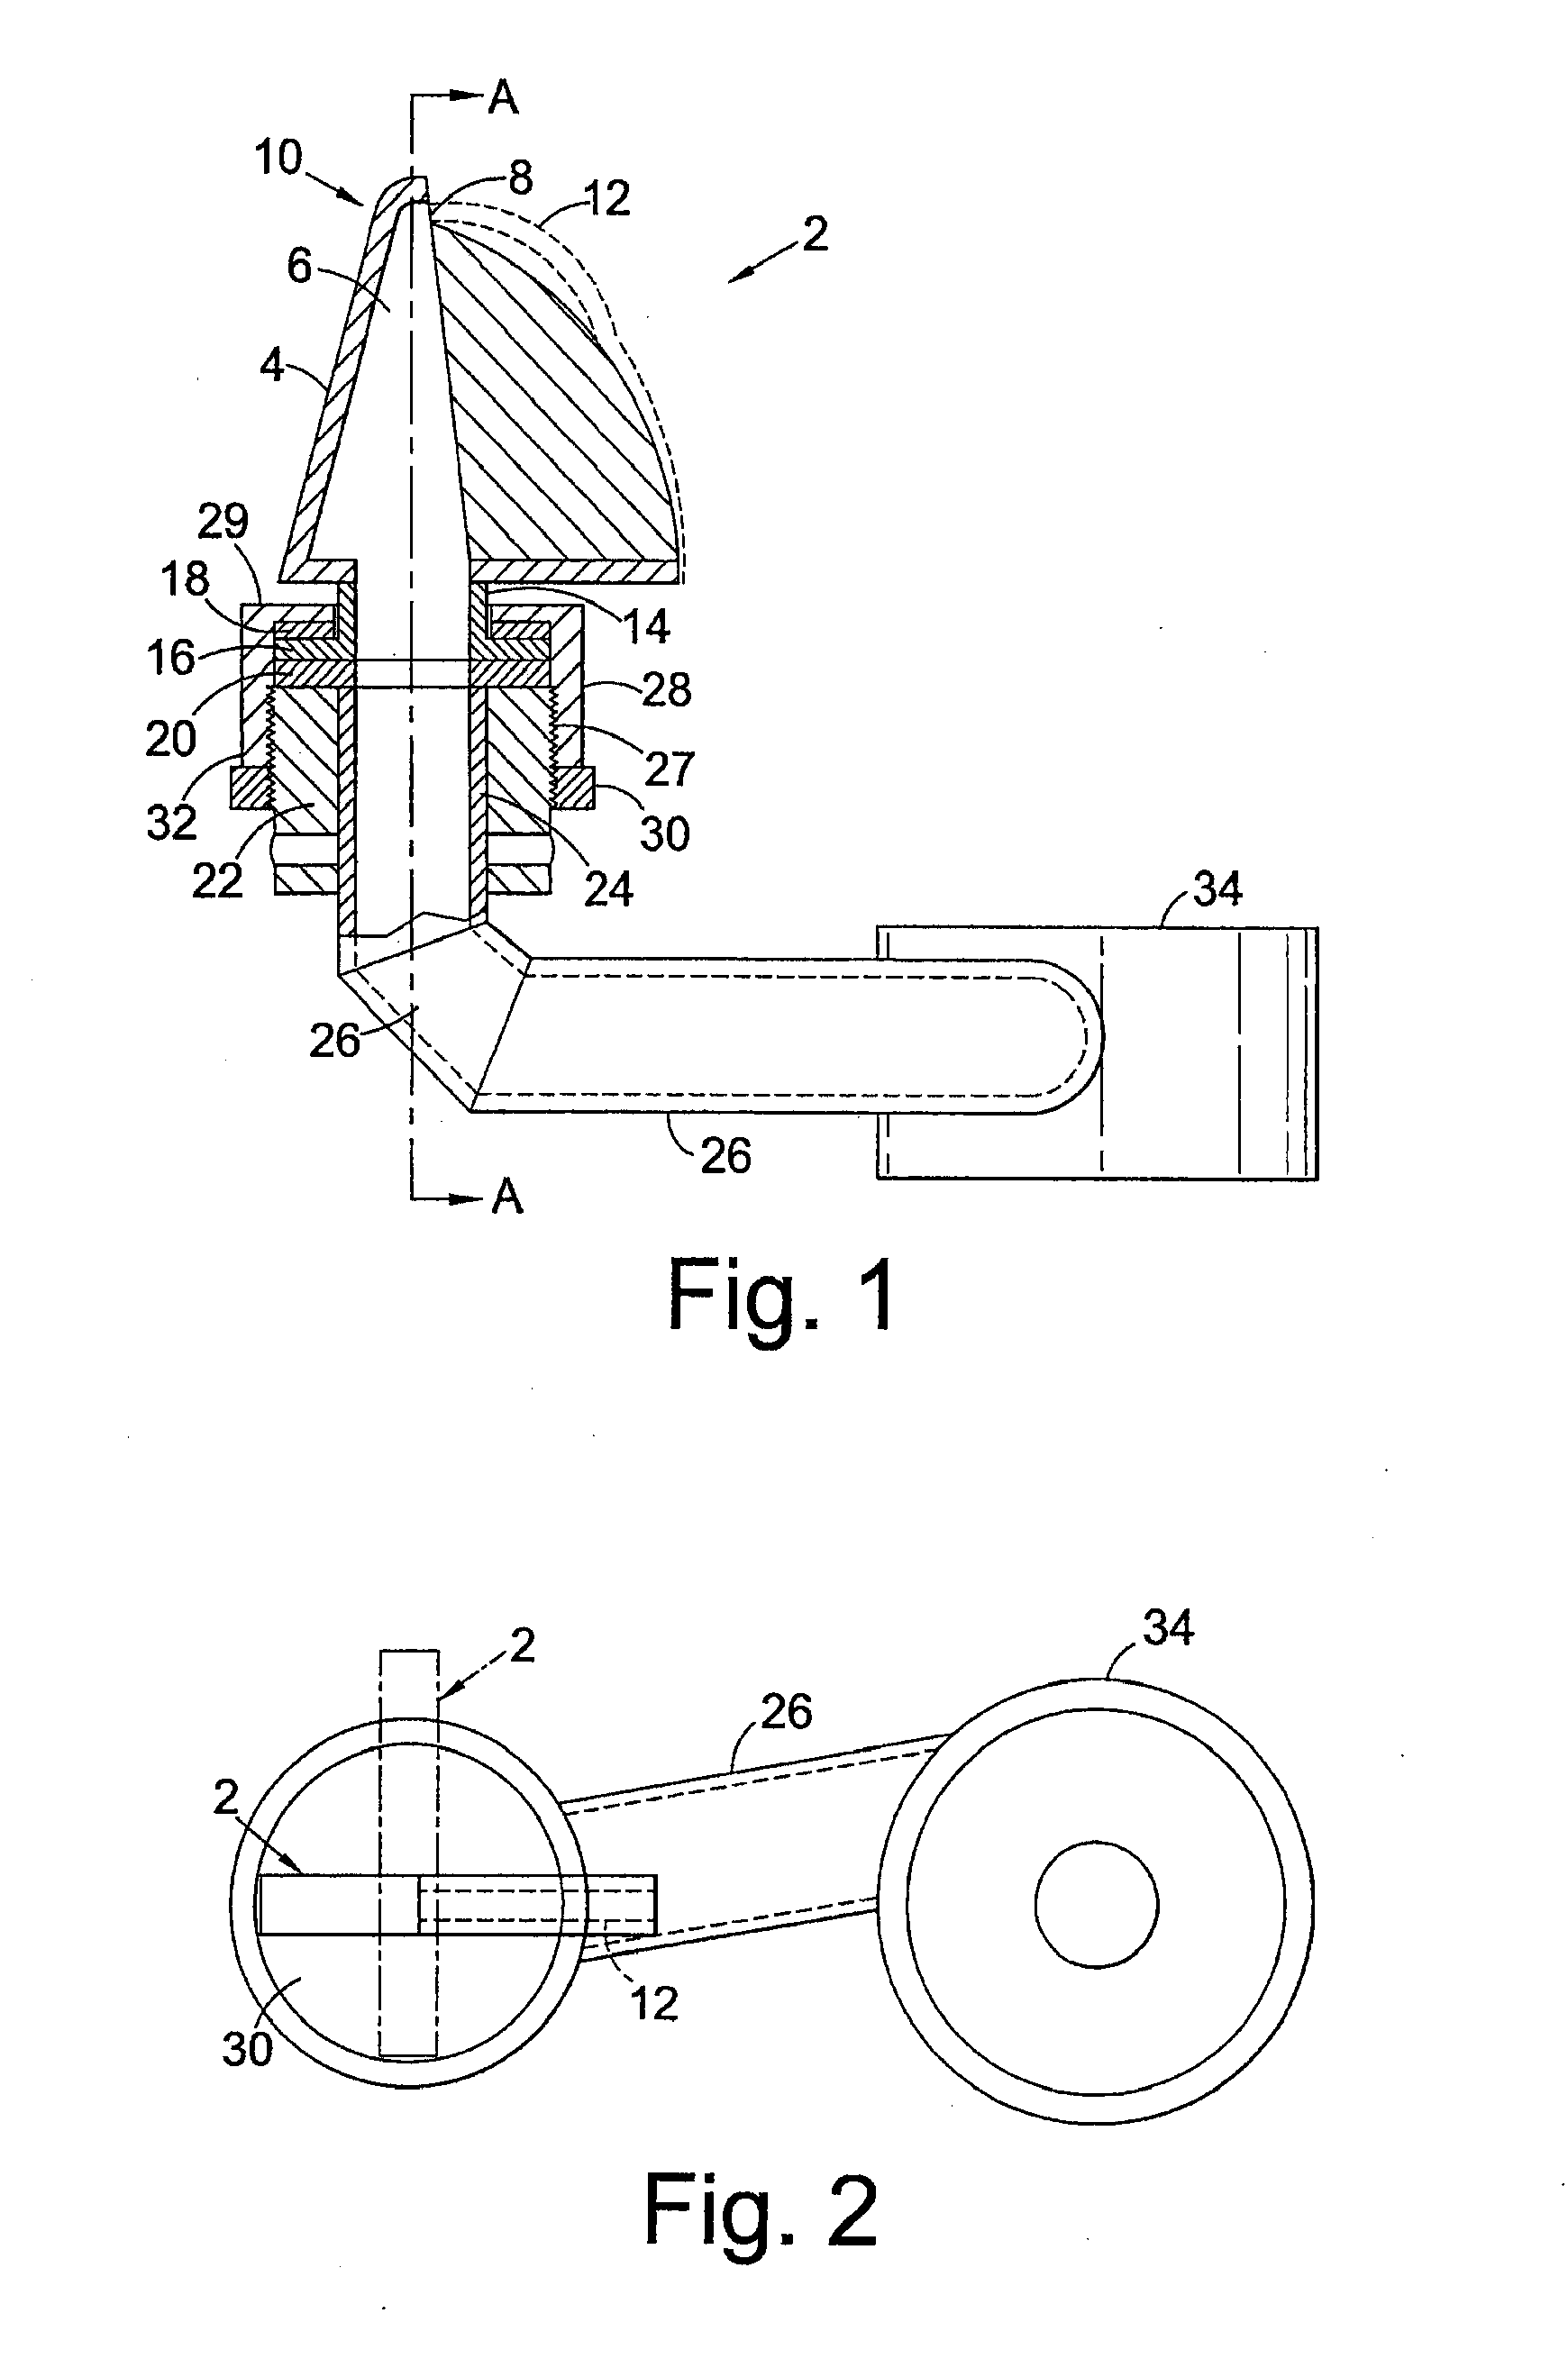 Selective soldering apparatus with jet wave solder jet and nitrogen preheat